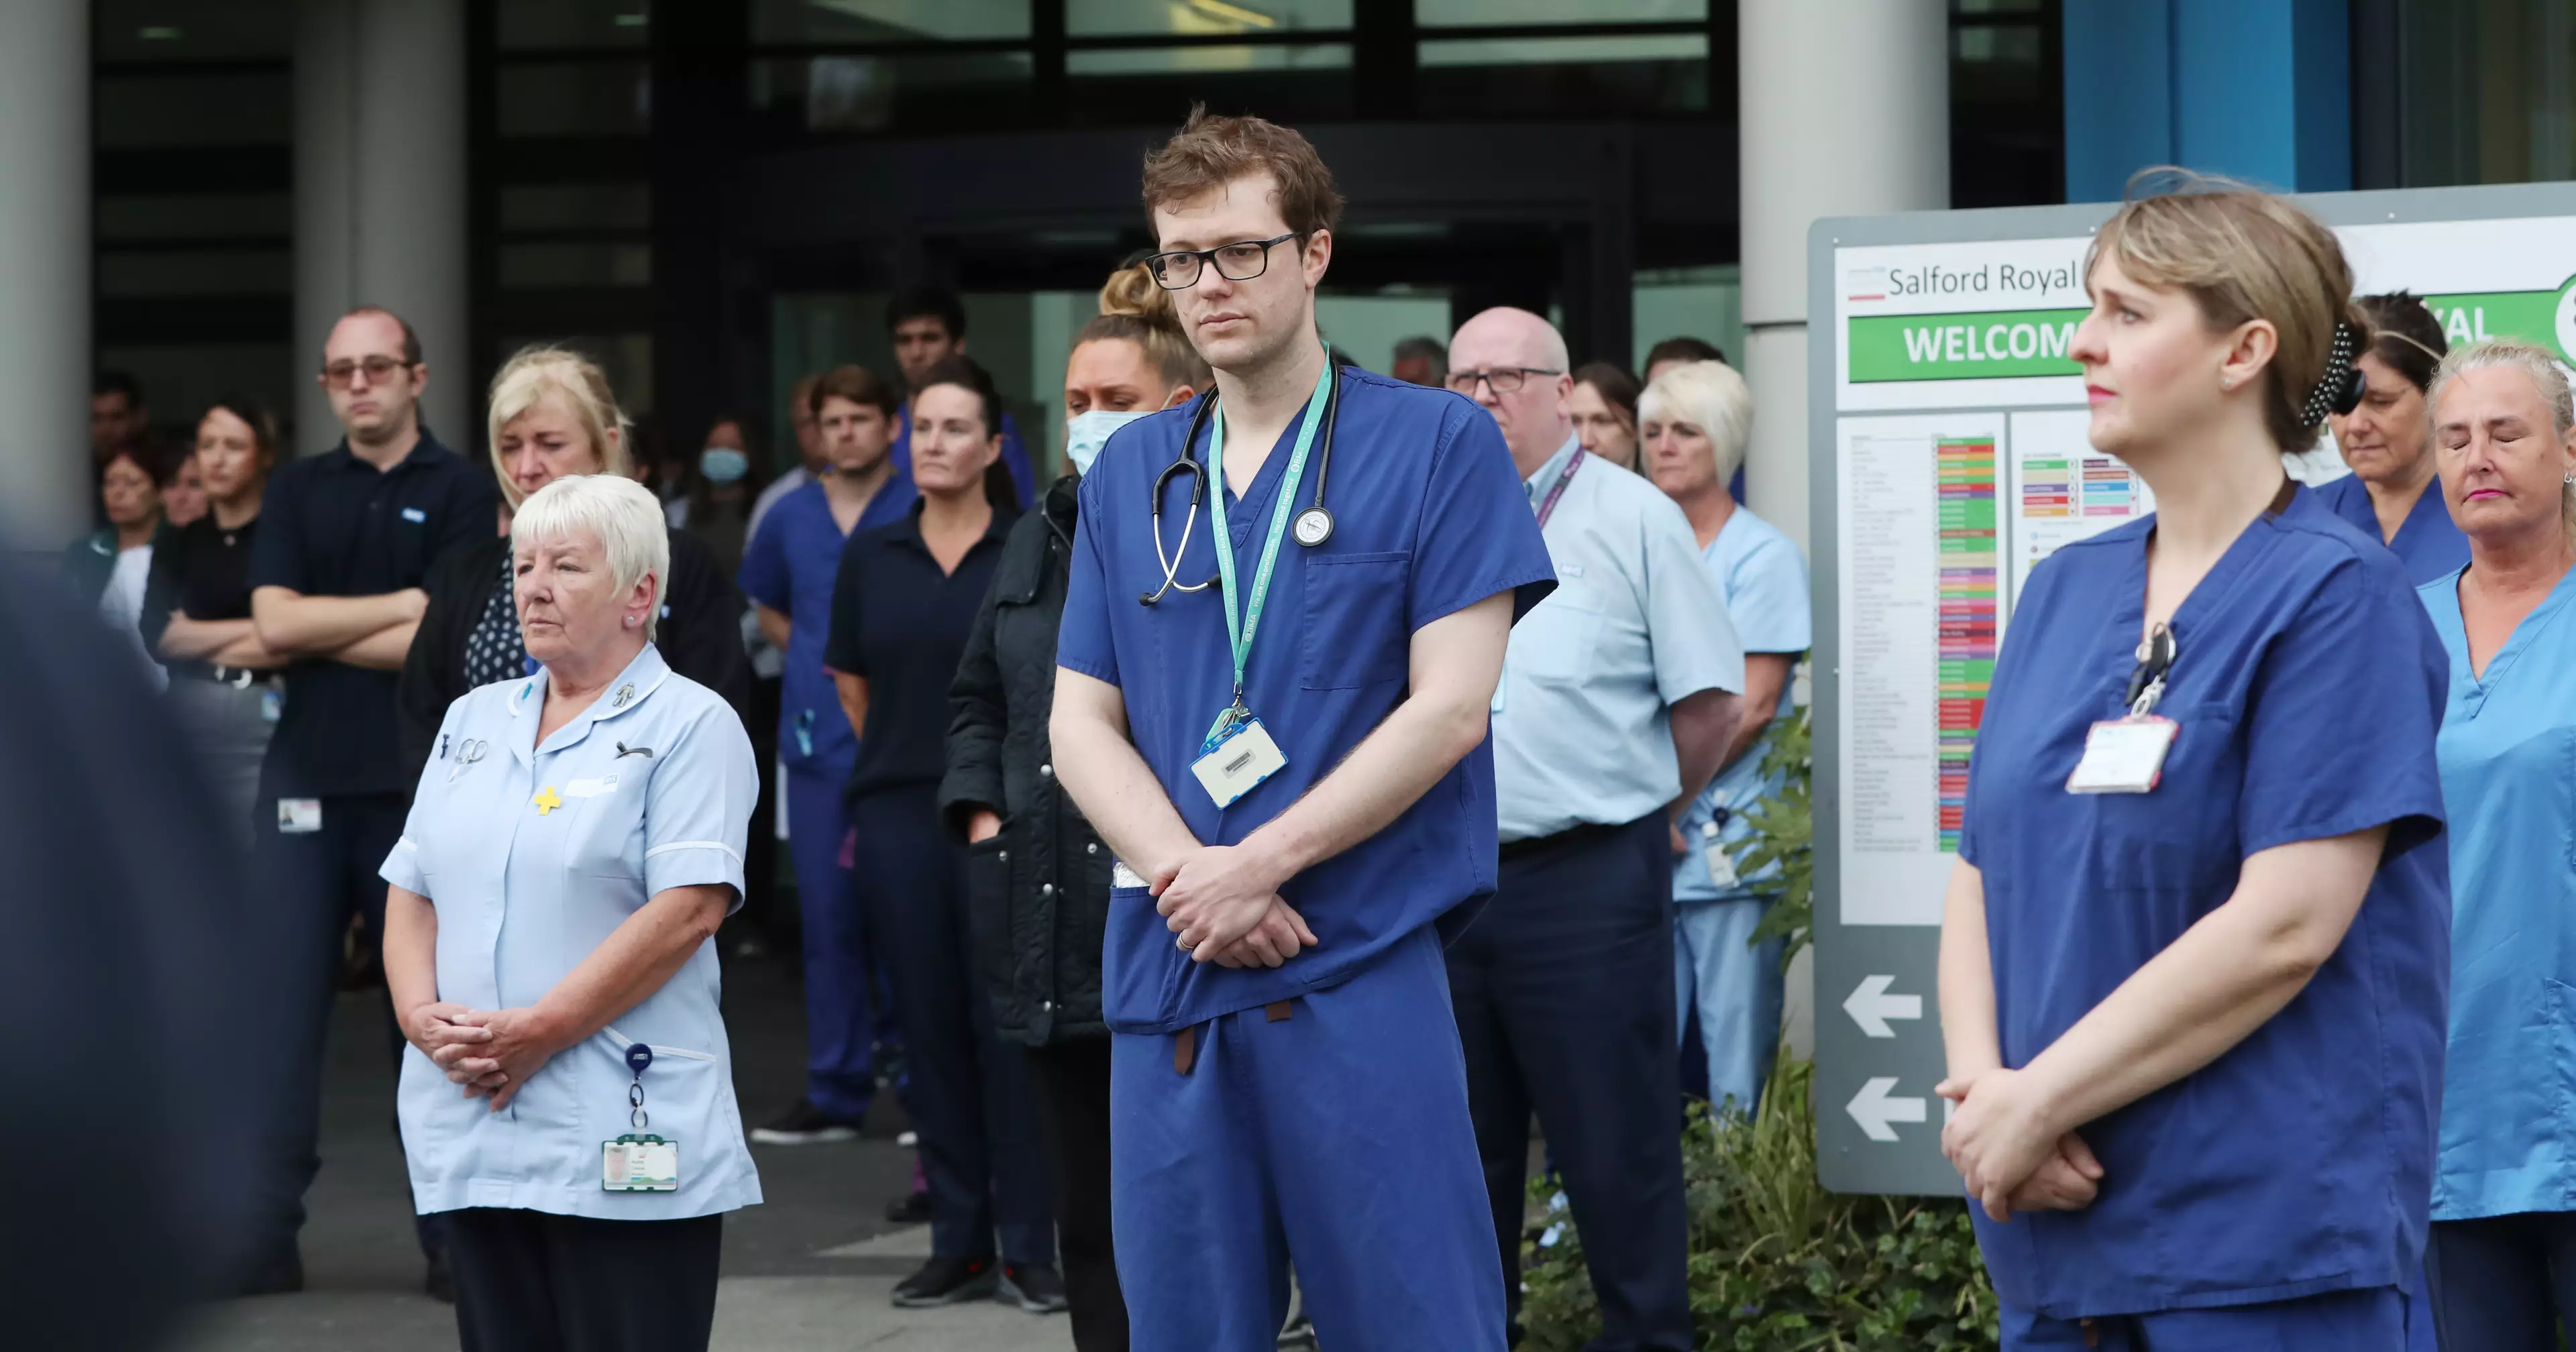 NHS staff standing side-by-side for the minute's silence.